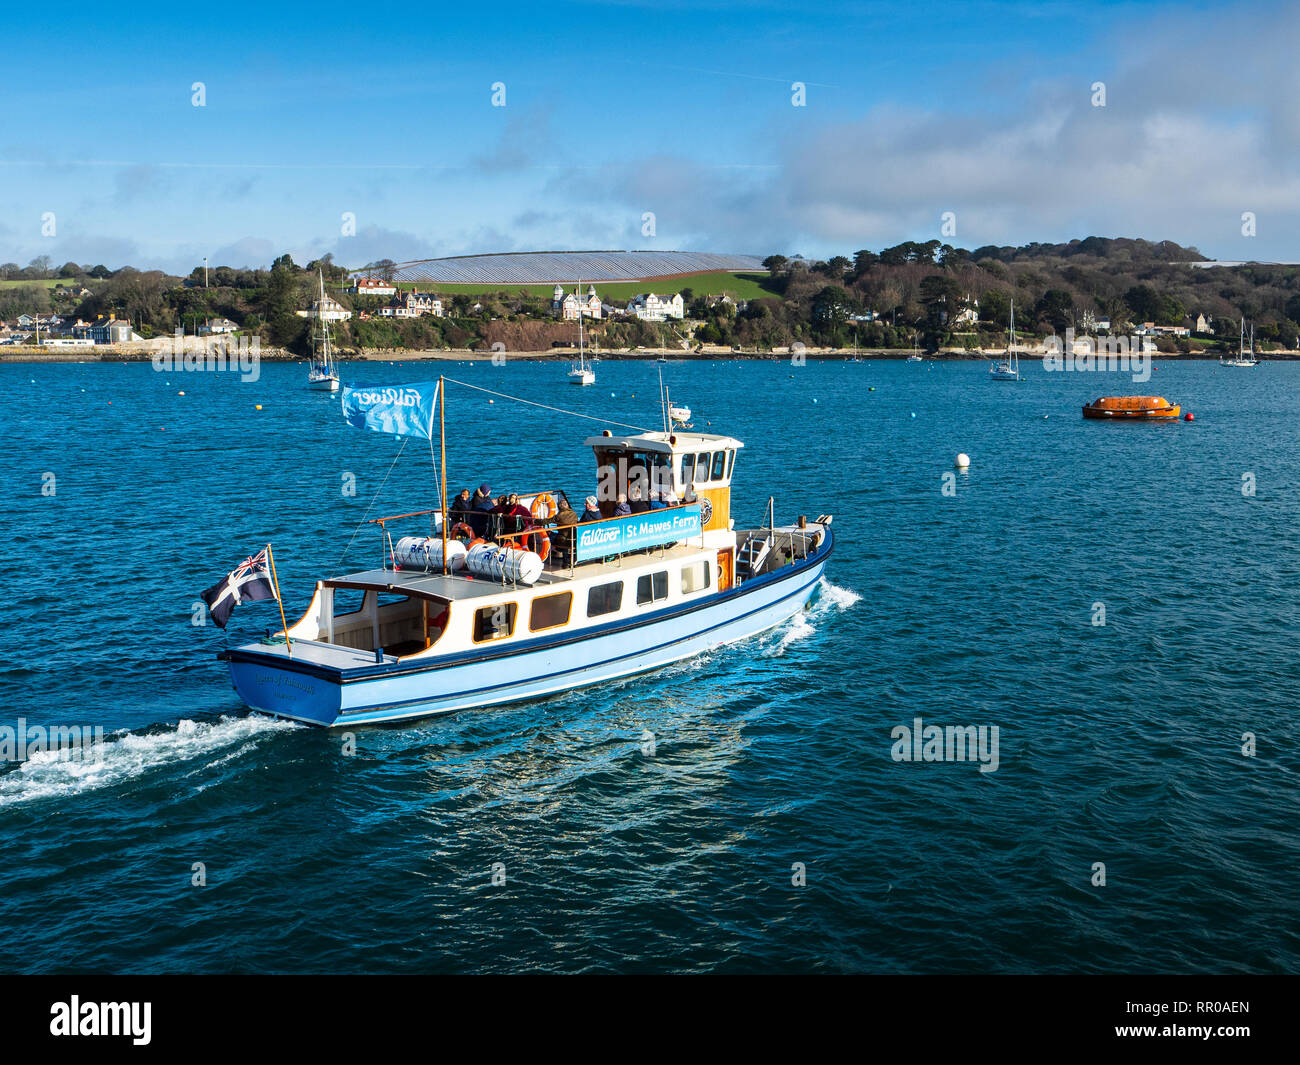 Falmouth St Mawes Ferry Queen of Falmouth departing from Falmouth Quay into the River Fal Stock Photo